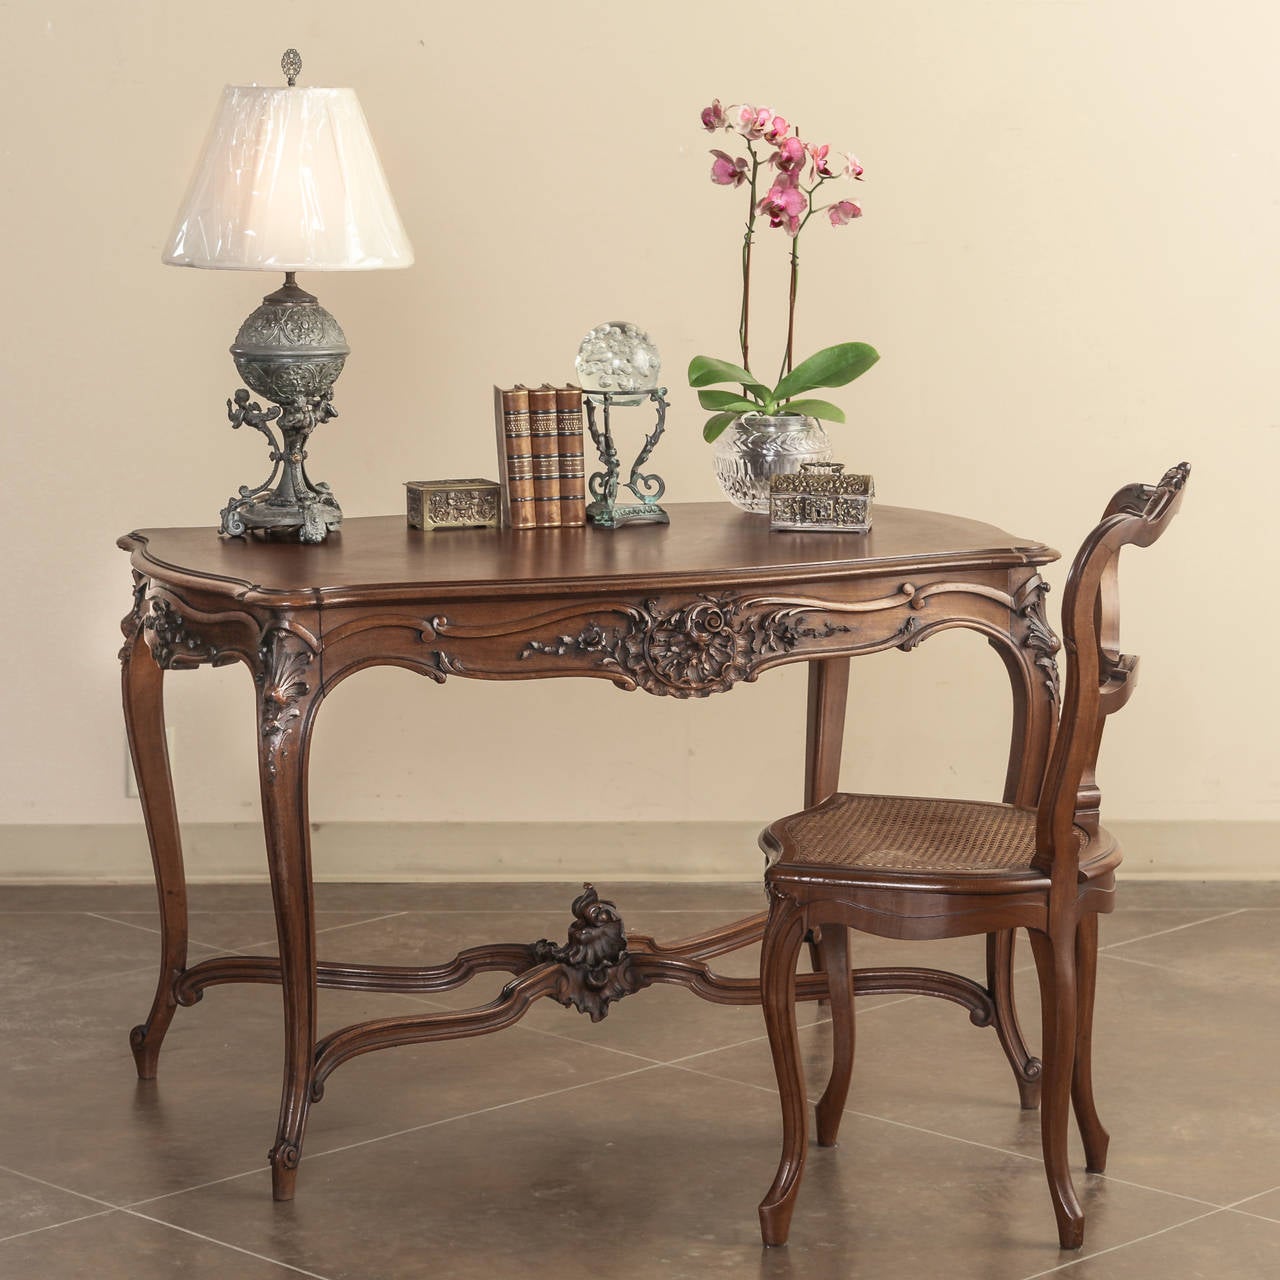 Sculpted from select French walnut, this antique French Louis XV walnut writing table makes the perfect 21st century desk! Graceful cabriole legs joined with double lyre stretchers provide stylish support, while the large drawer provides ample